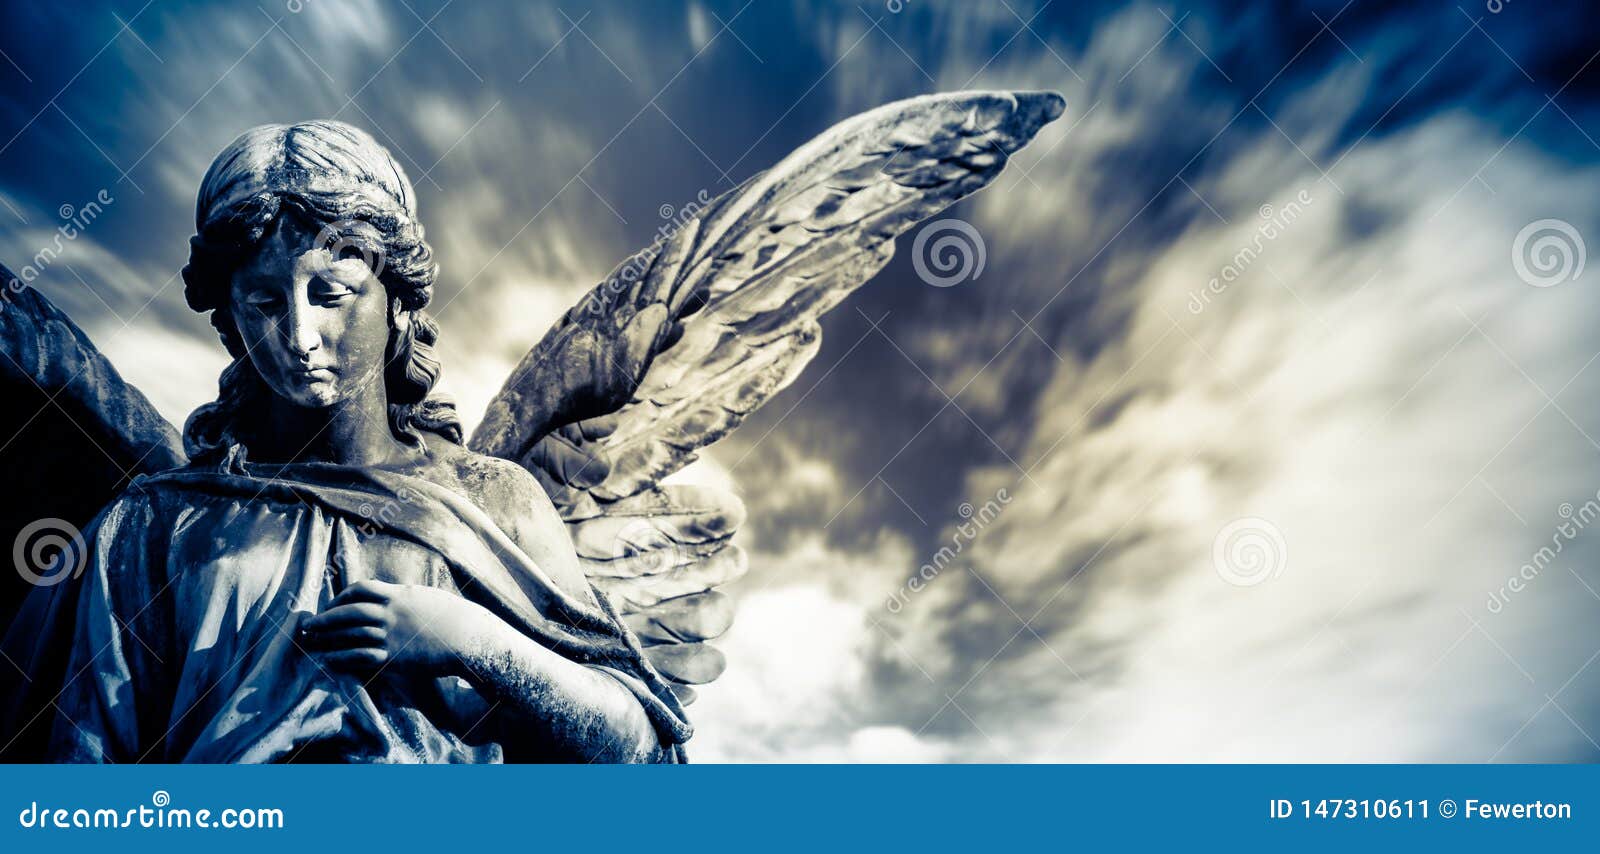 guardian angel sculpture with open long wings  with blurred white clouds dramatic light blue sky. angel sad expression